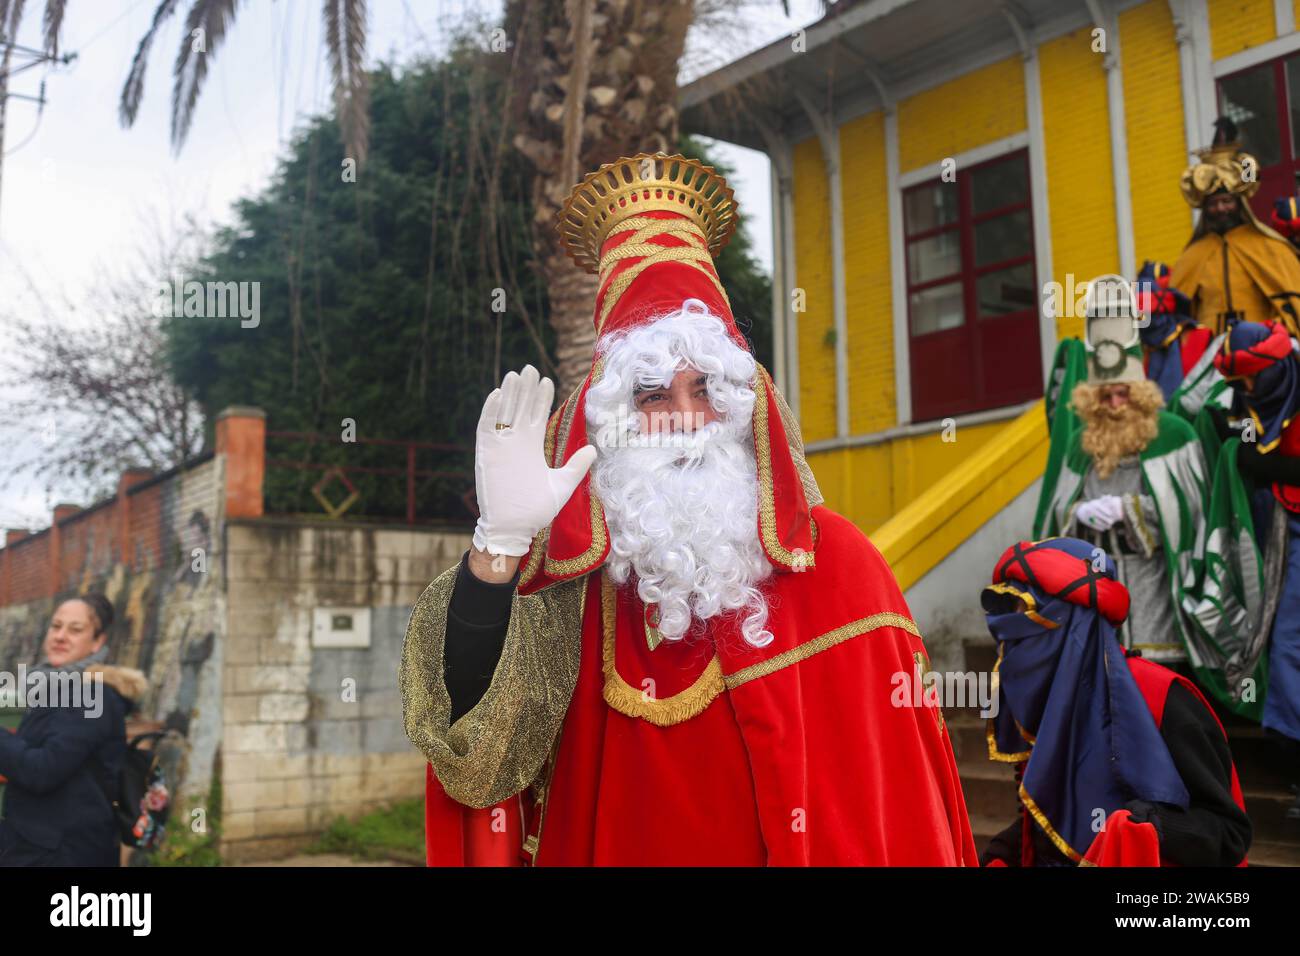 Noreña, Spain, January 05th, 2024: King Melchior greets children during the arrival of HM The Three Wise Men to Noreña, on January 05, 2024, in Noreña, Spain. Credit: Alberto Brevers / Alamy Live News. Stock Photo